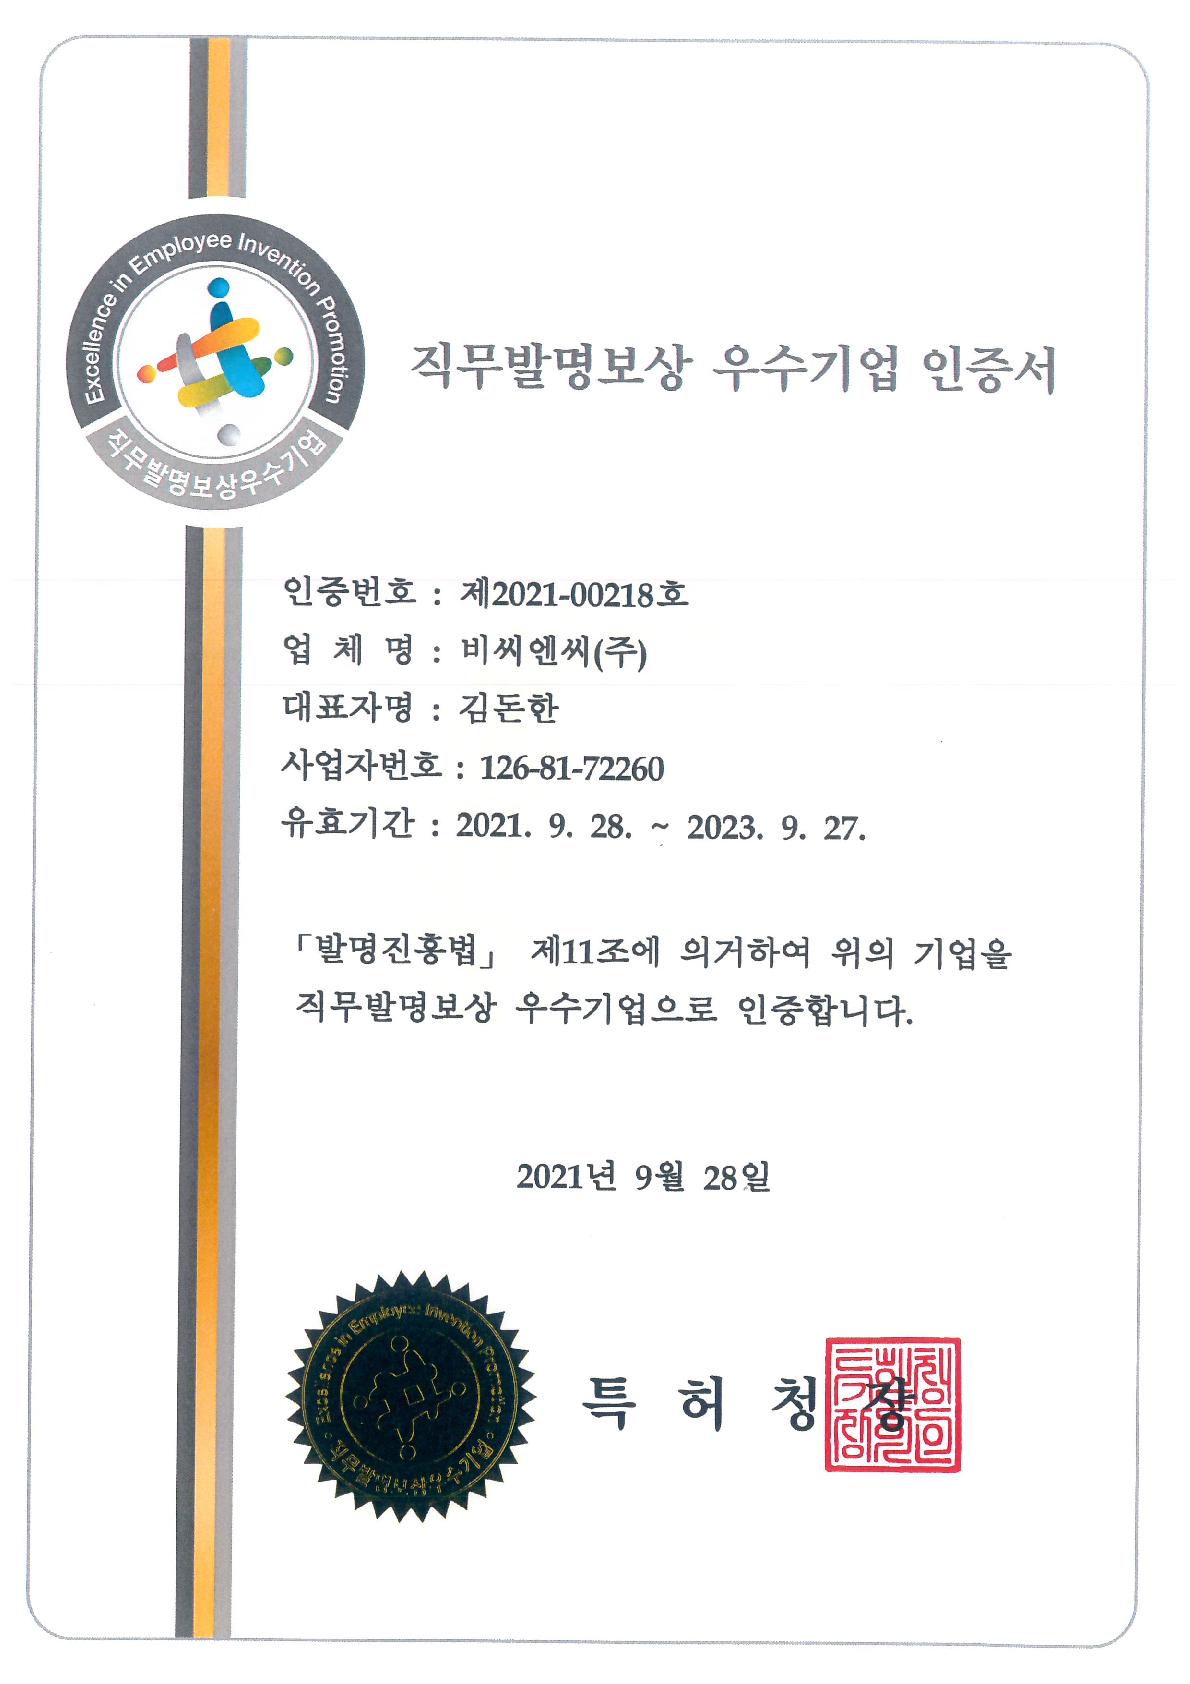 Excellence in Employee Inovation Promotion Certification 이미지